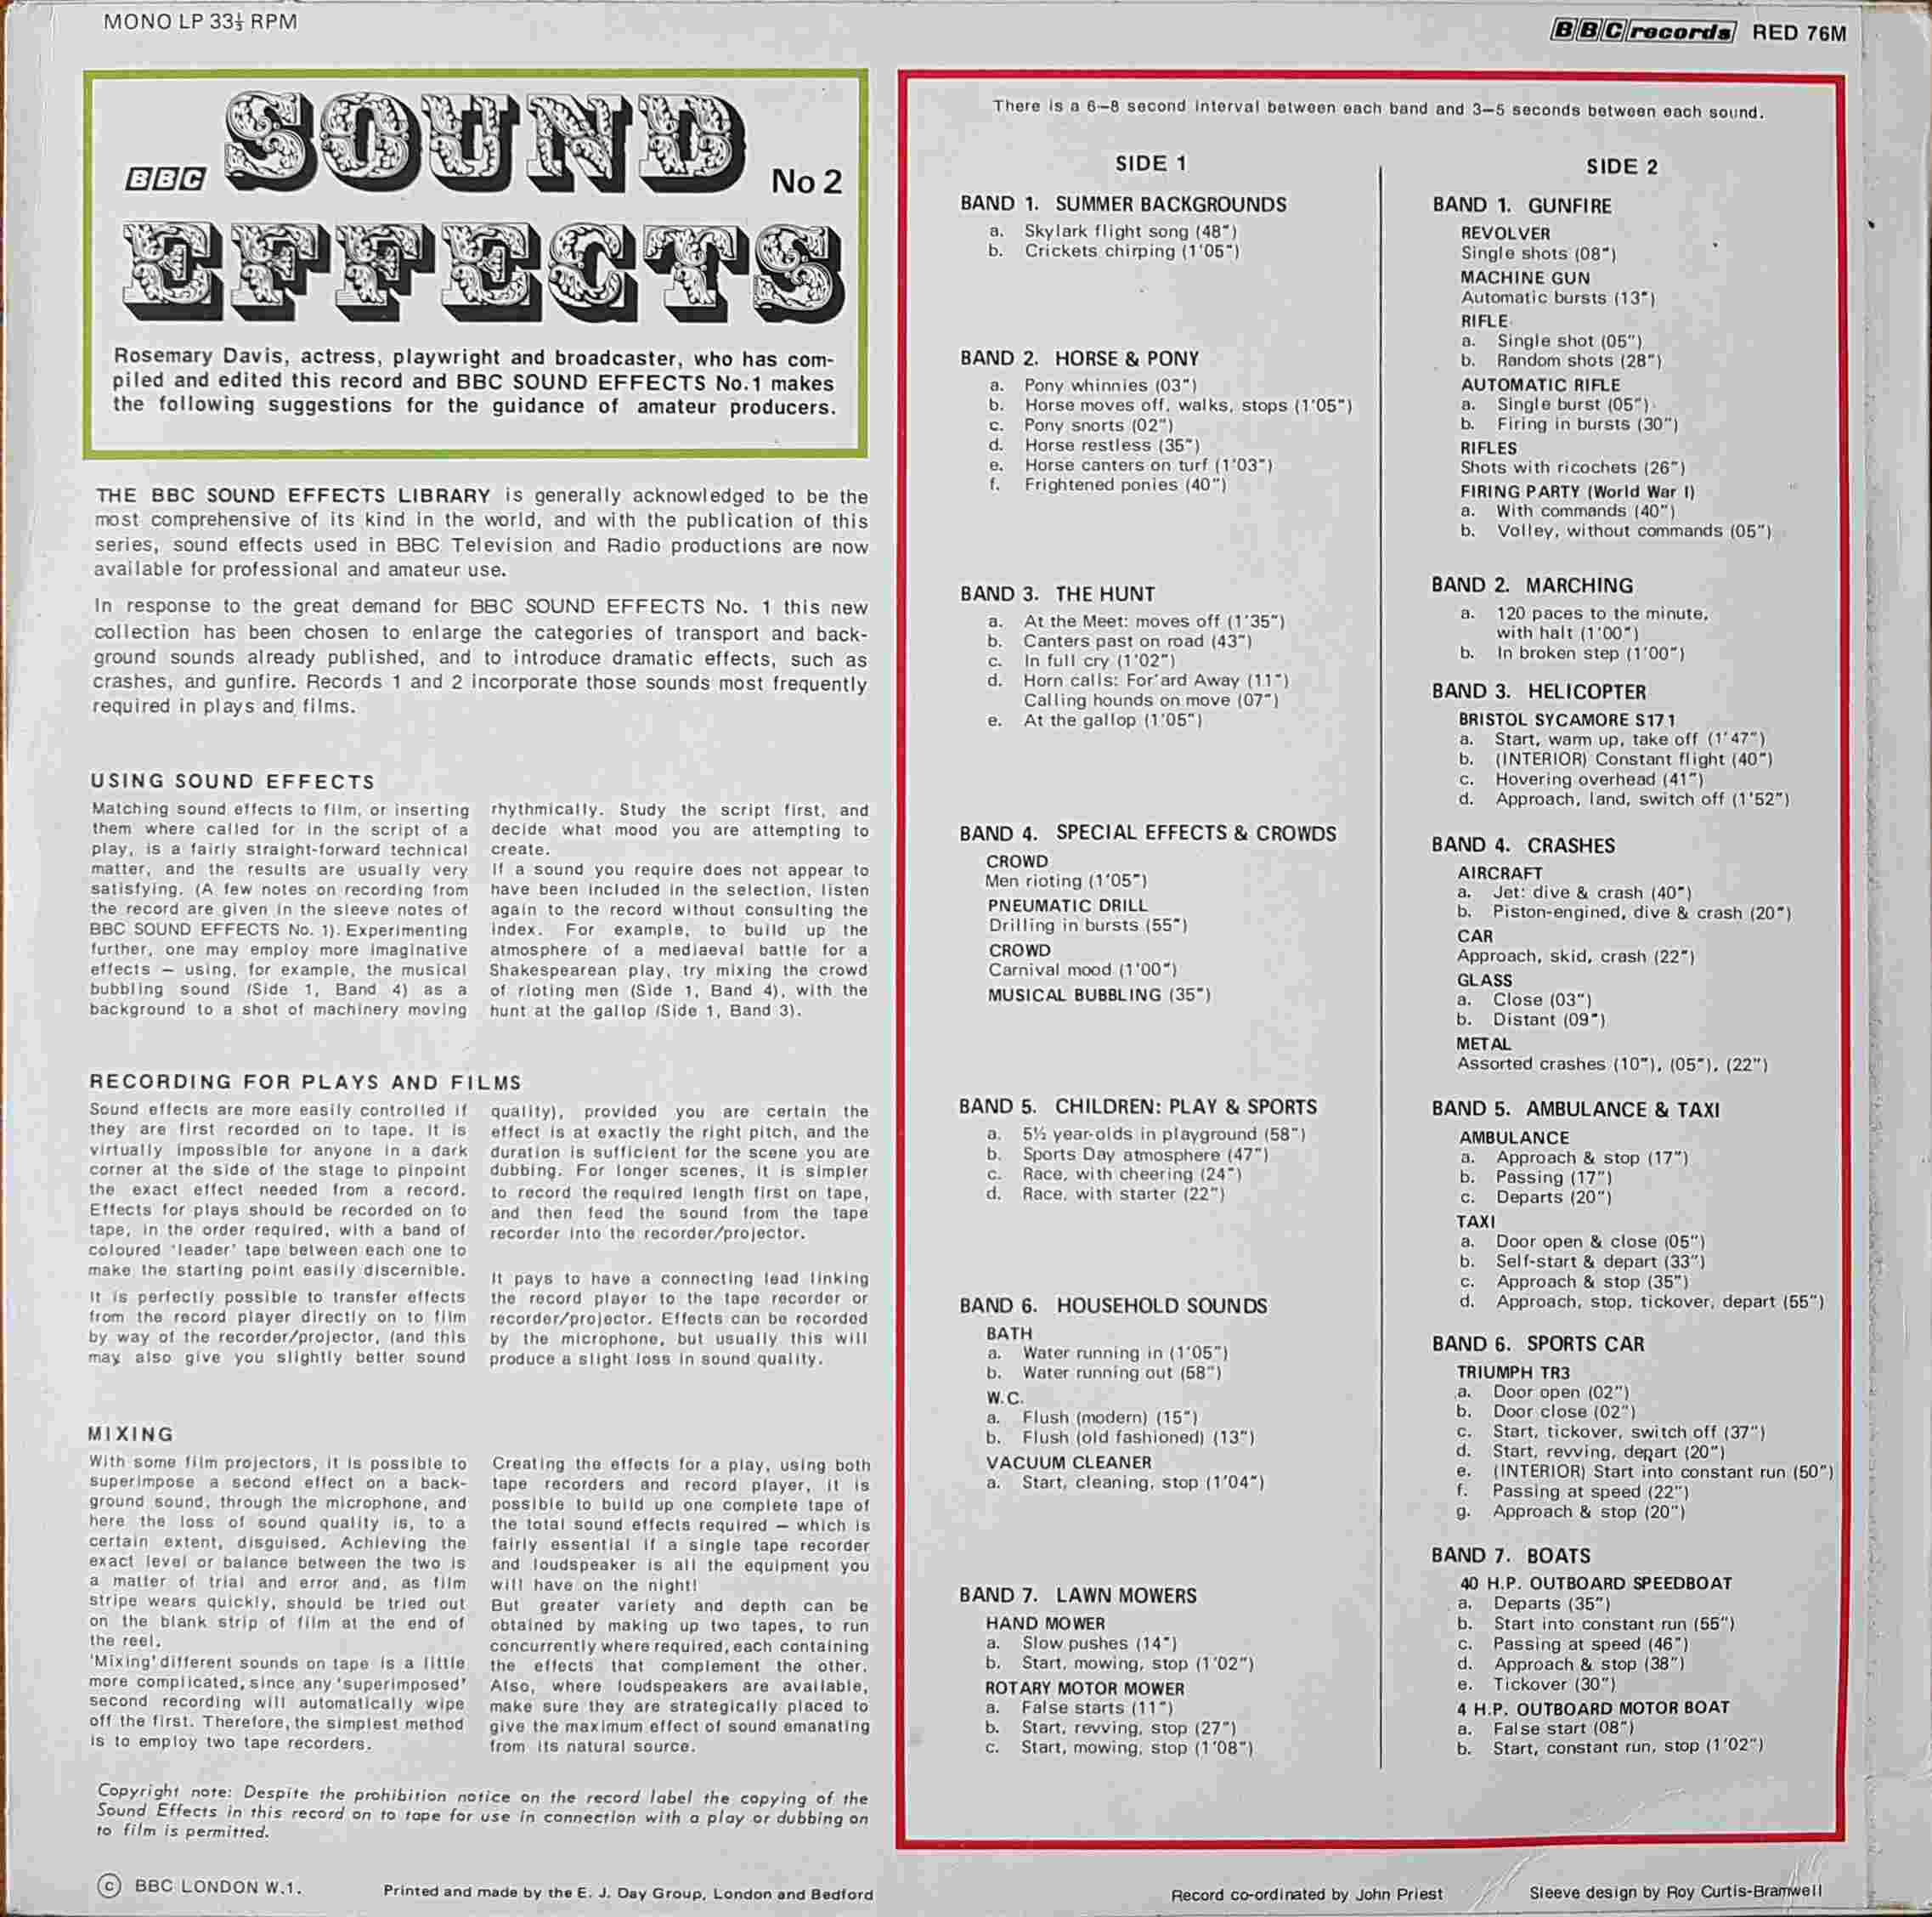 Picture of RED 76 Sound effects no. 2 by artist Various from the BBC records and Tapes library